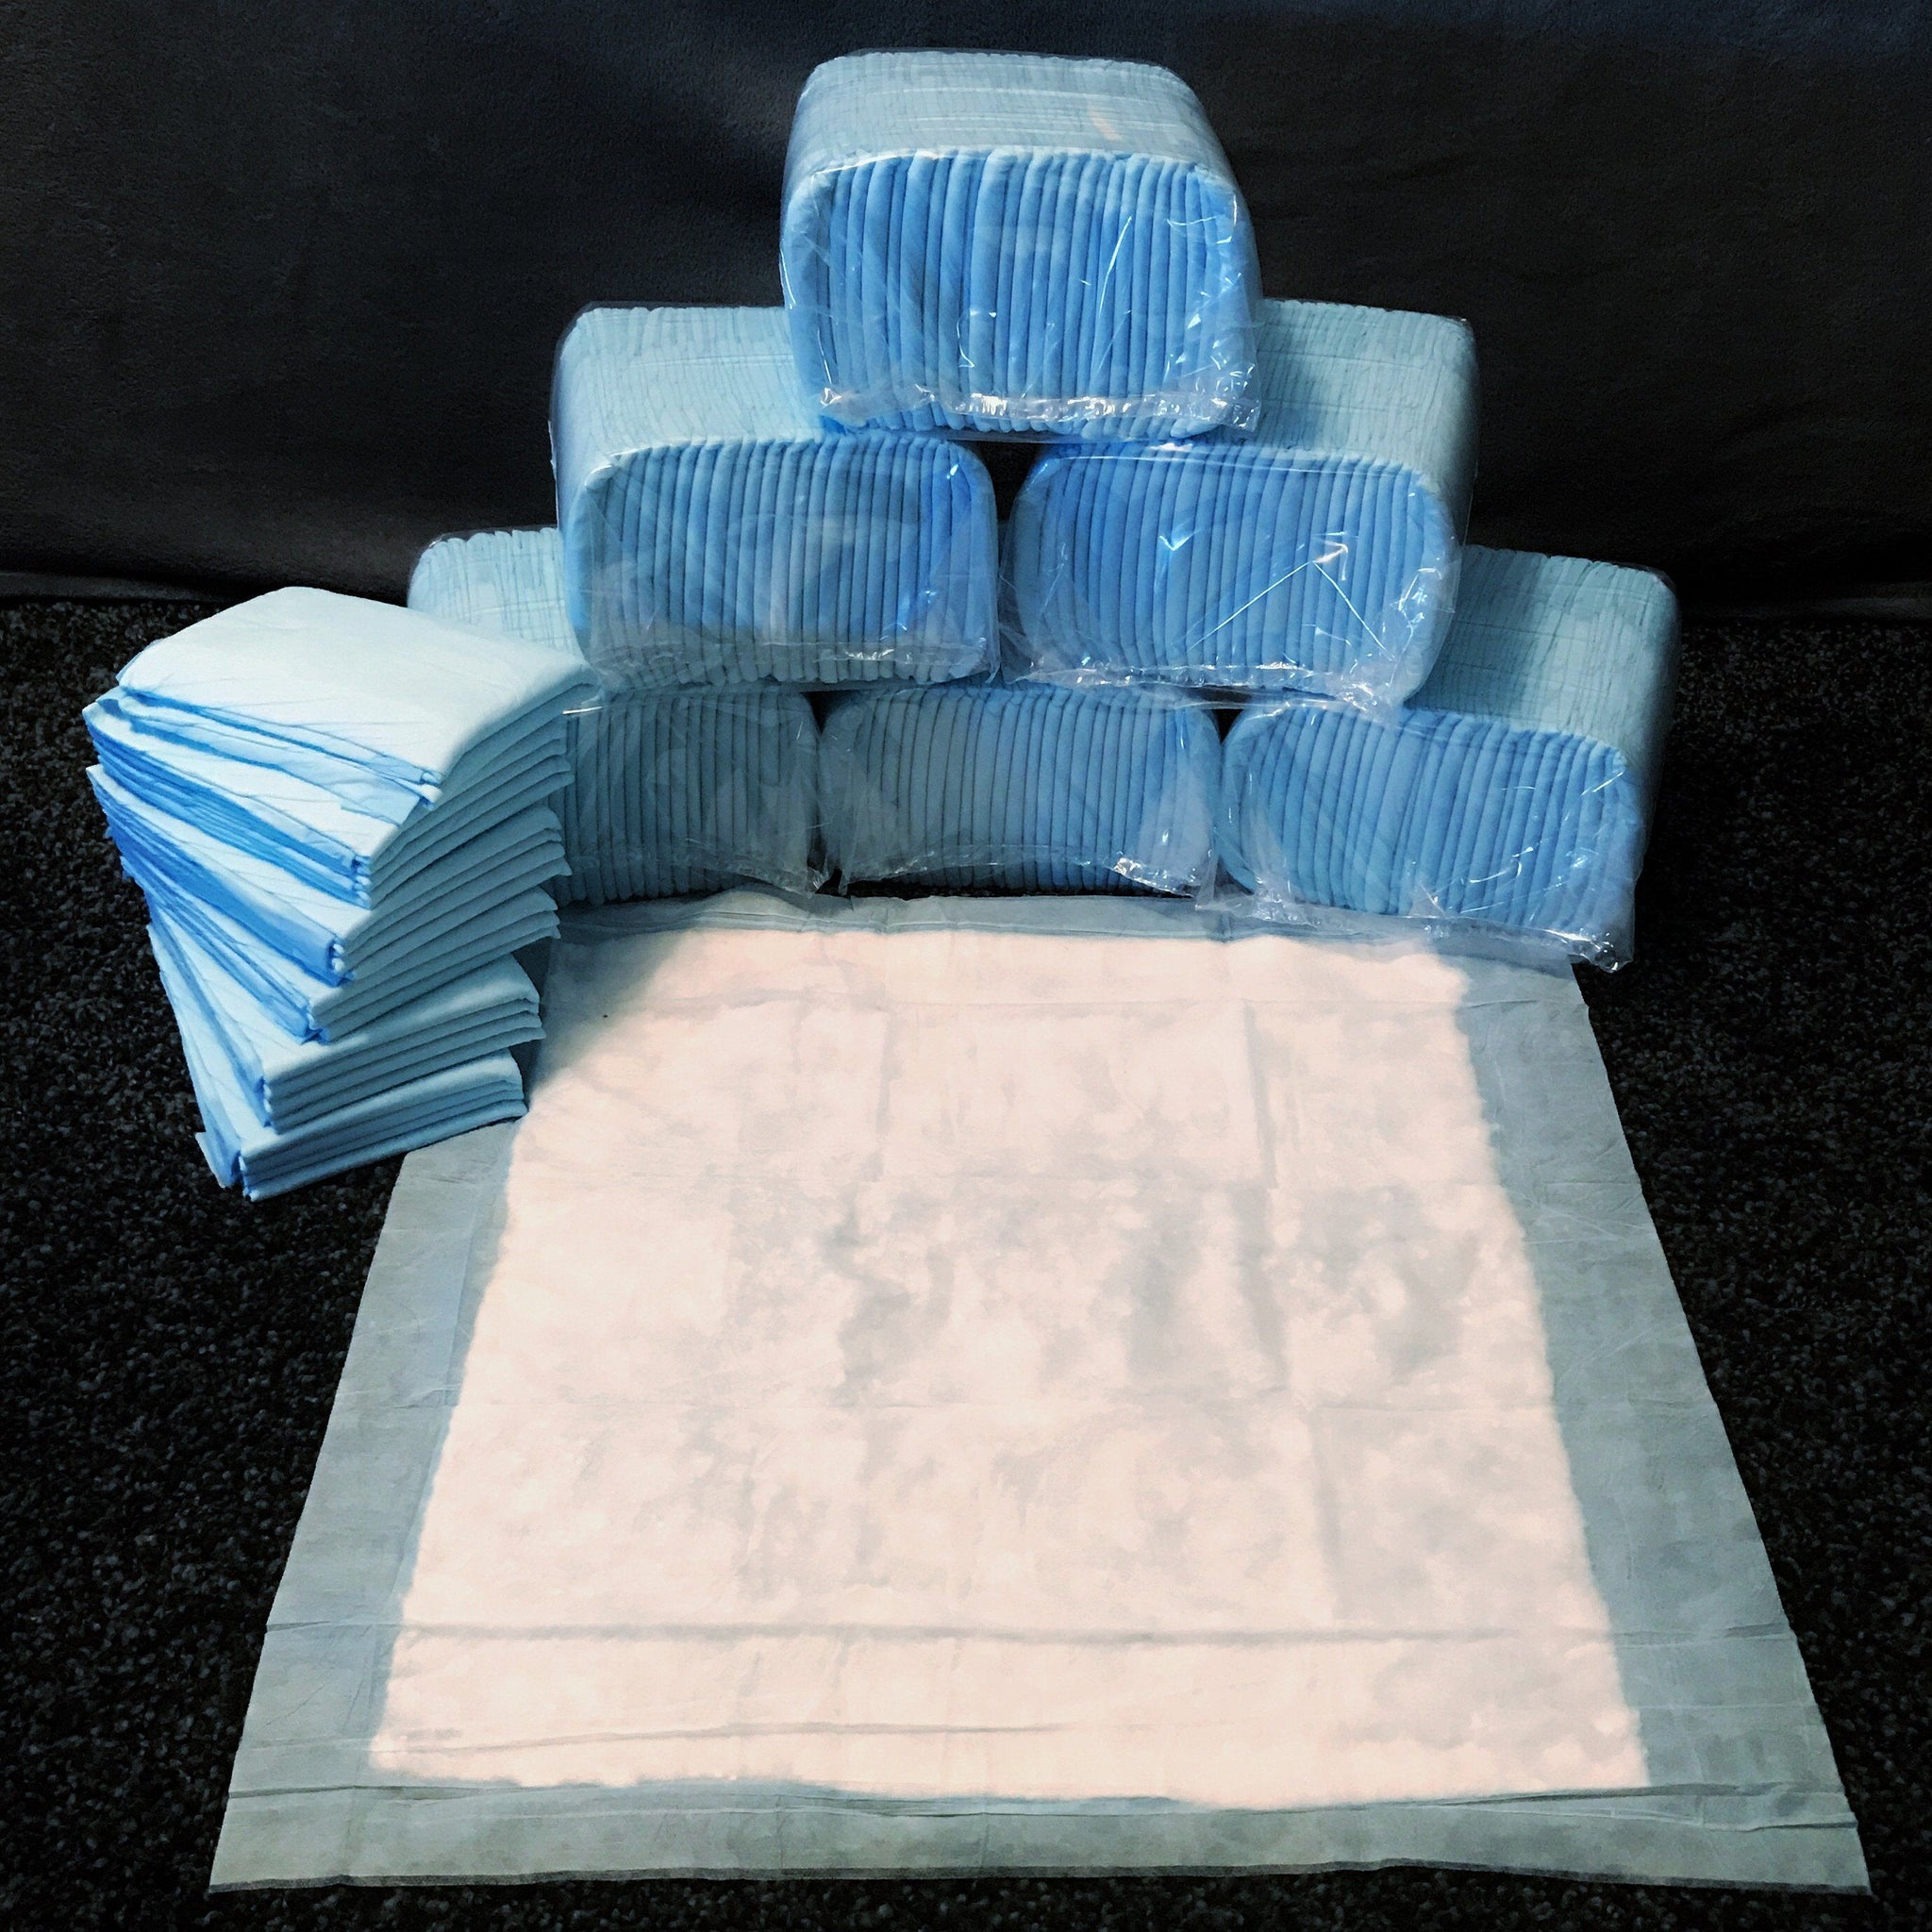 400 Large Size 23x24 In Pee Pads - Free Shipping $99.97 - $10 Savings For Bulk Discount - Pee-Pads.com